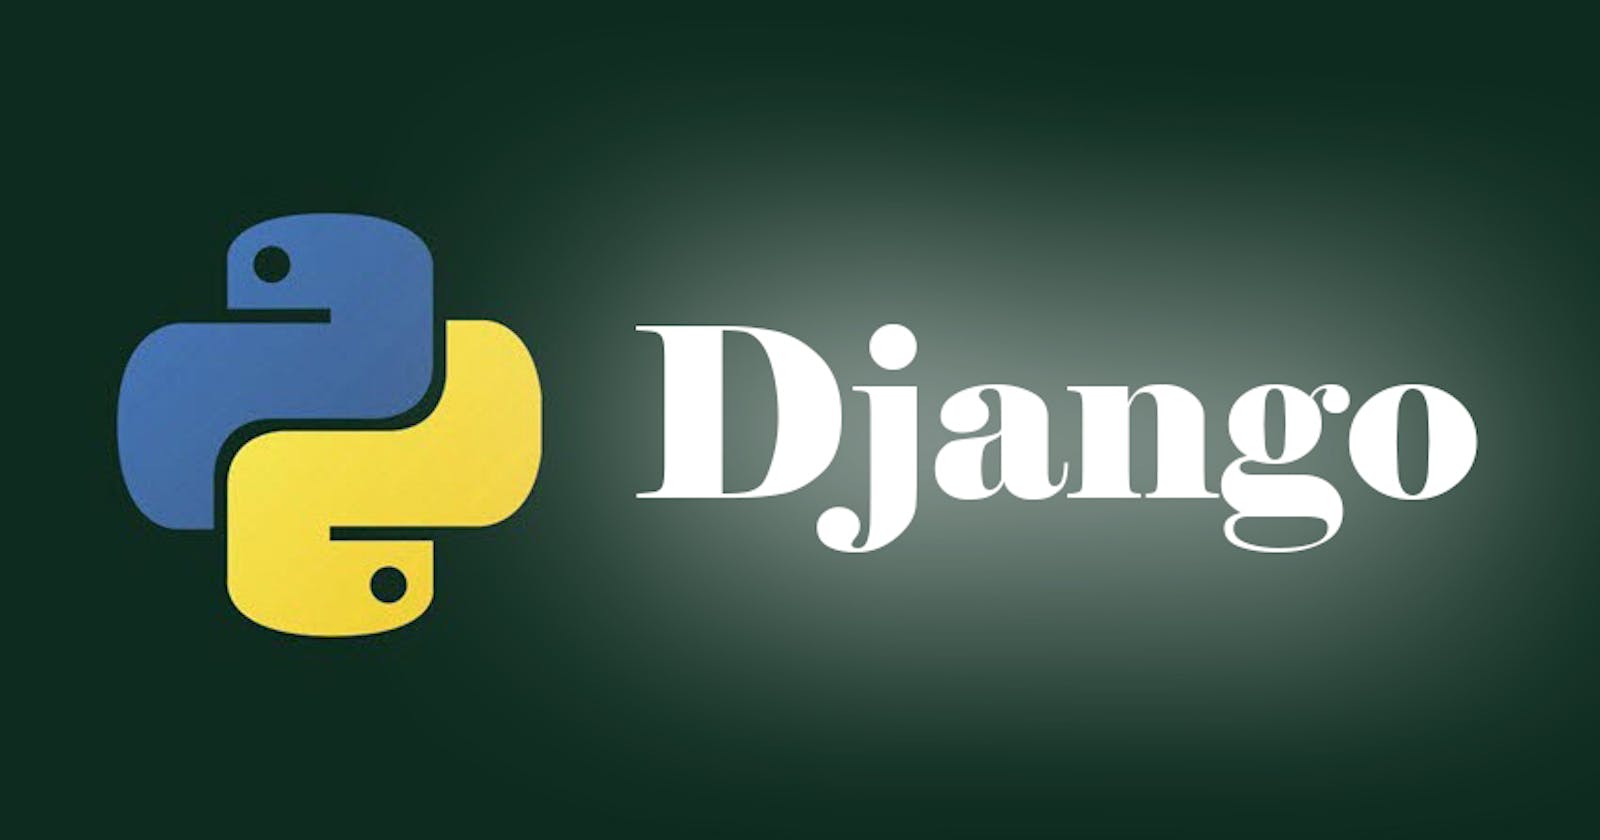 What Do We KNow About Django?